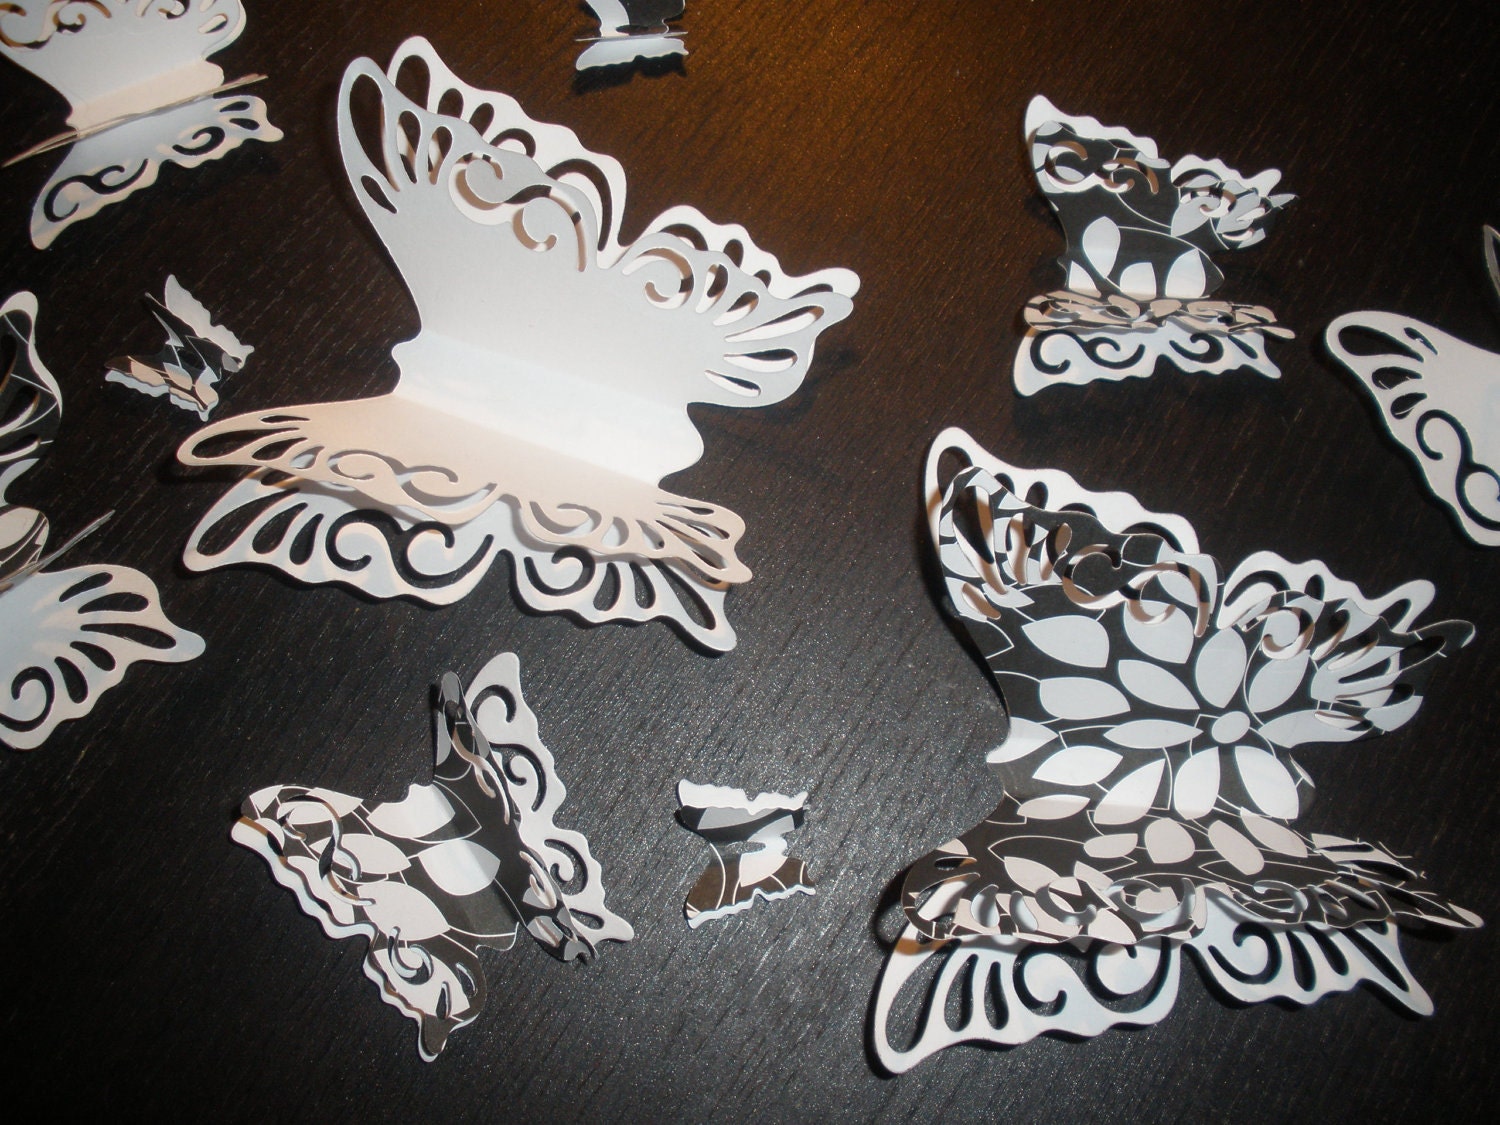 20 Fablous Black and White Double Wing Butterflies ,3D, Art, Paper, Wall Decor,Girl Room, Nursery, Wedding, Baby Shower